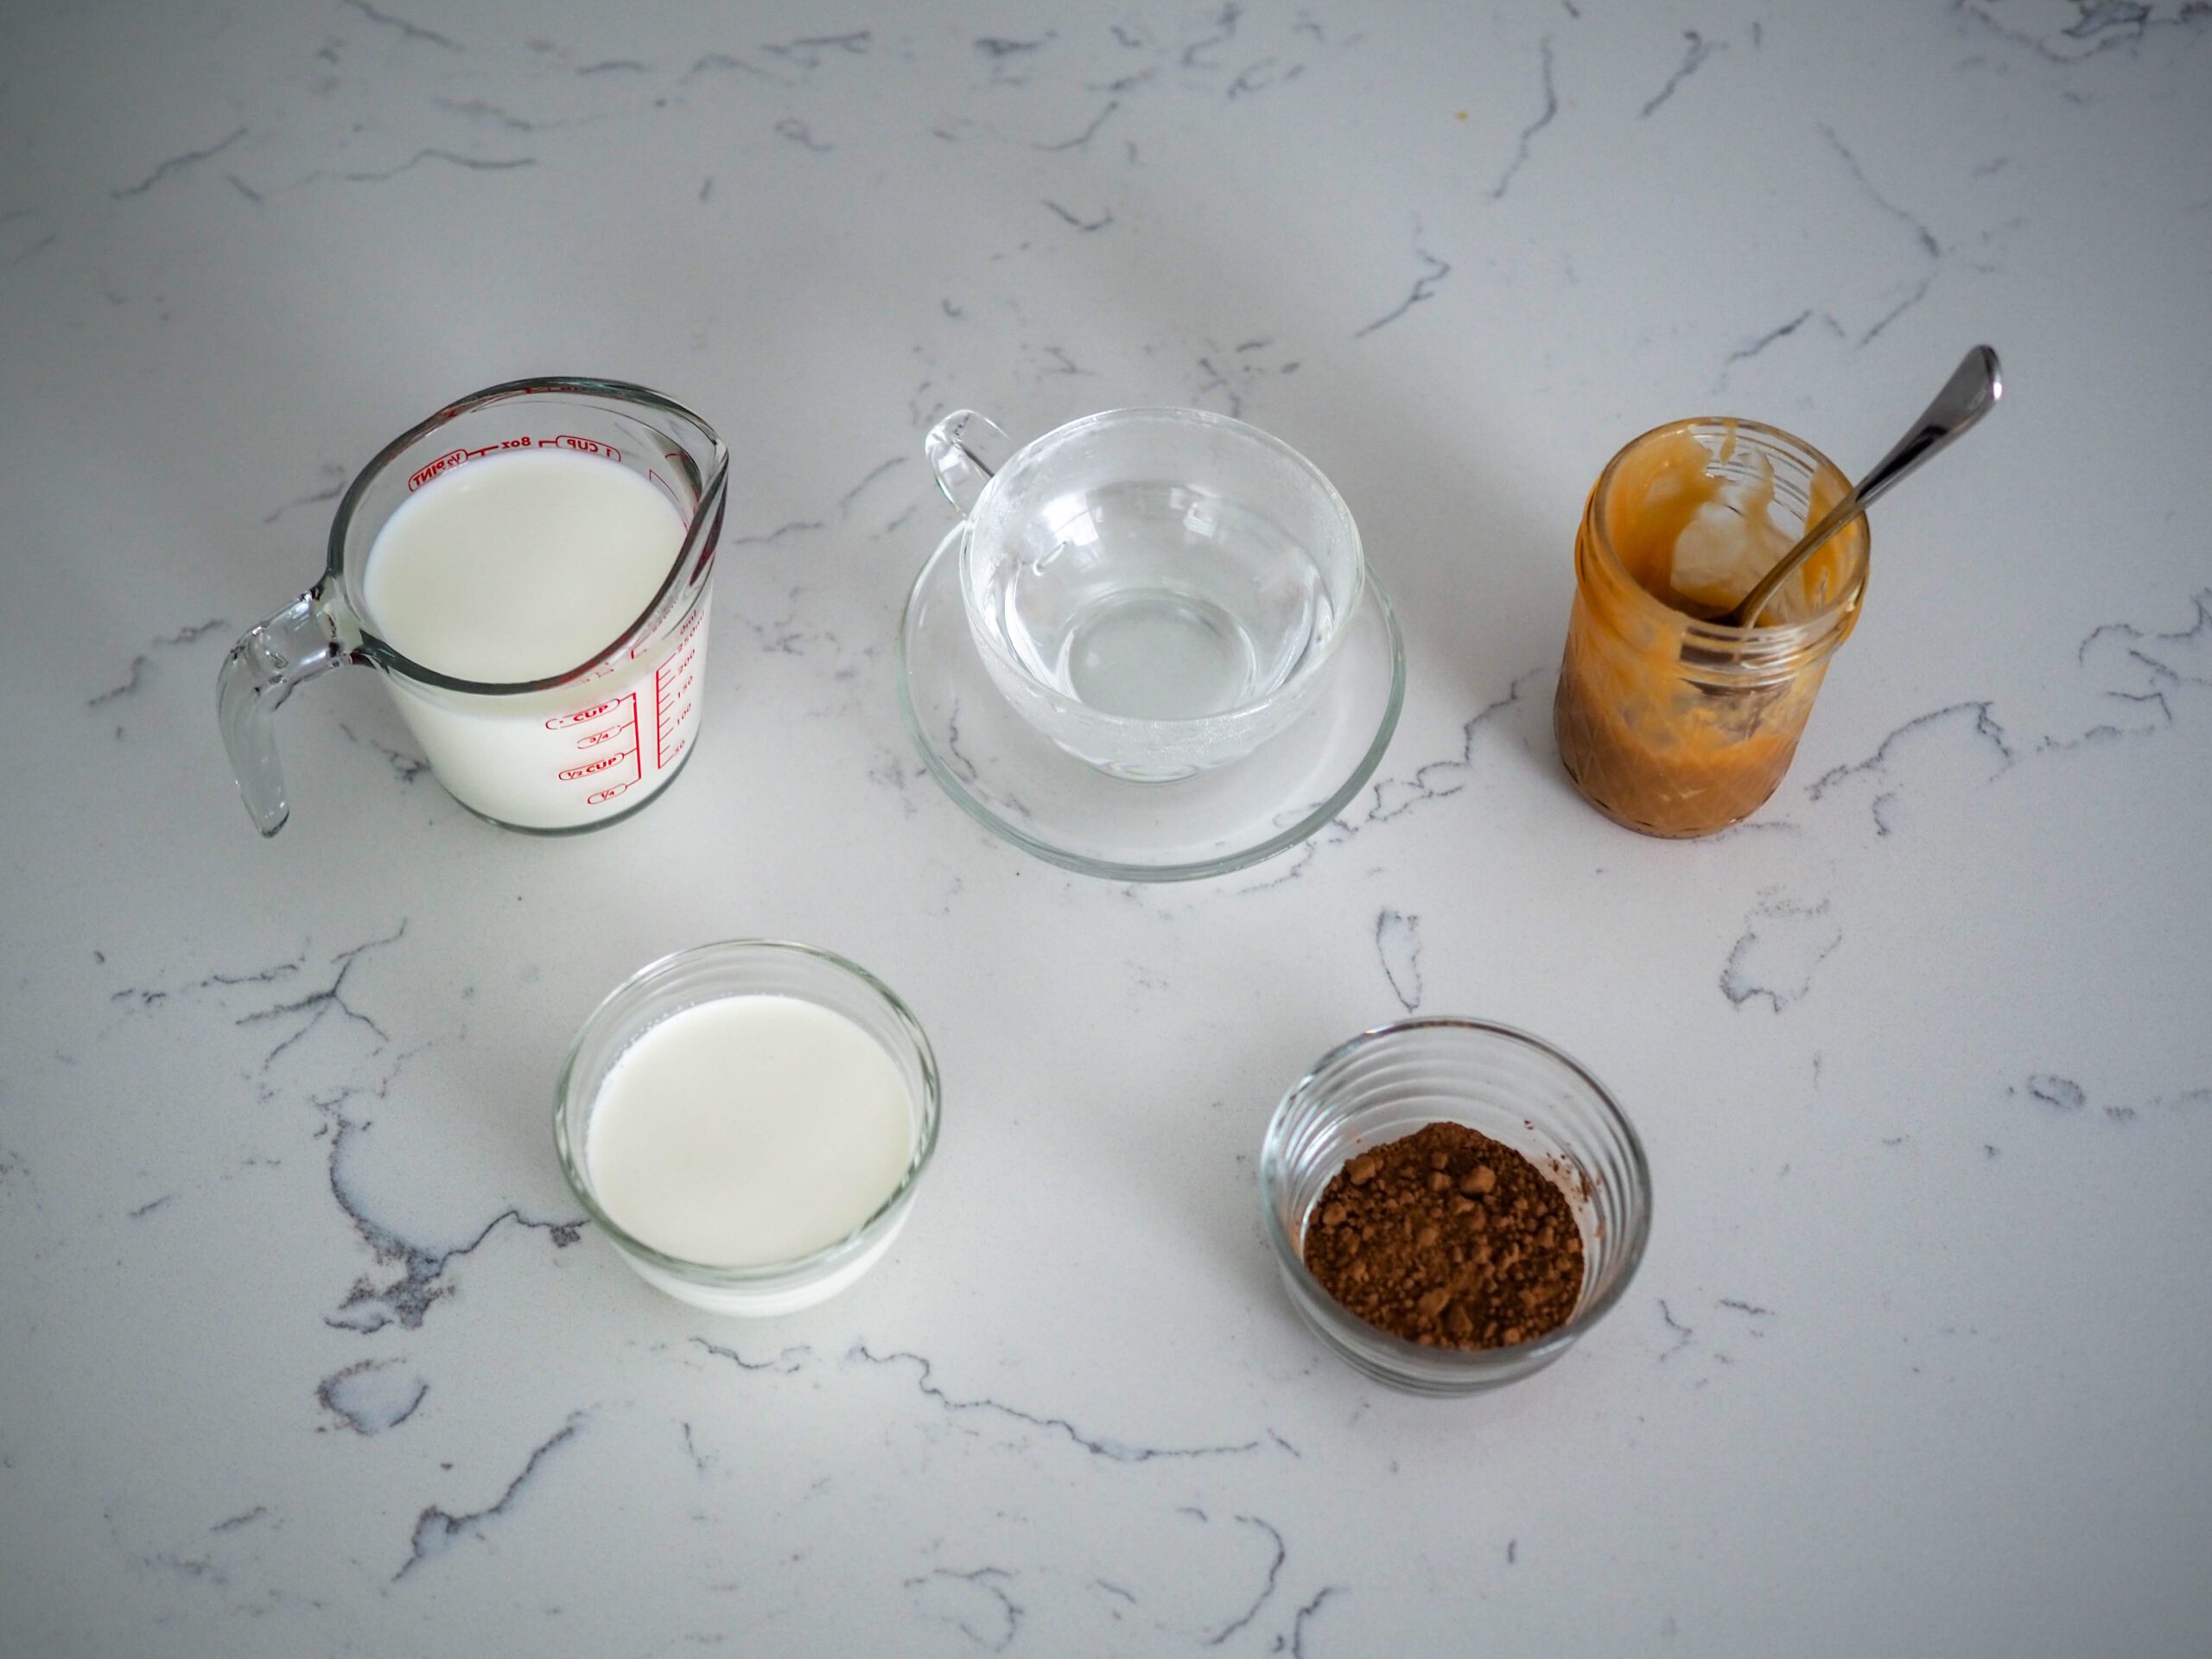 A measuring cup with milk, a tea cup with hot water, a jar of salted caramel, and two prep bowls filled with cocoa powder and heavy cream rest on a white quartz counter.